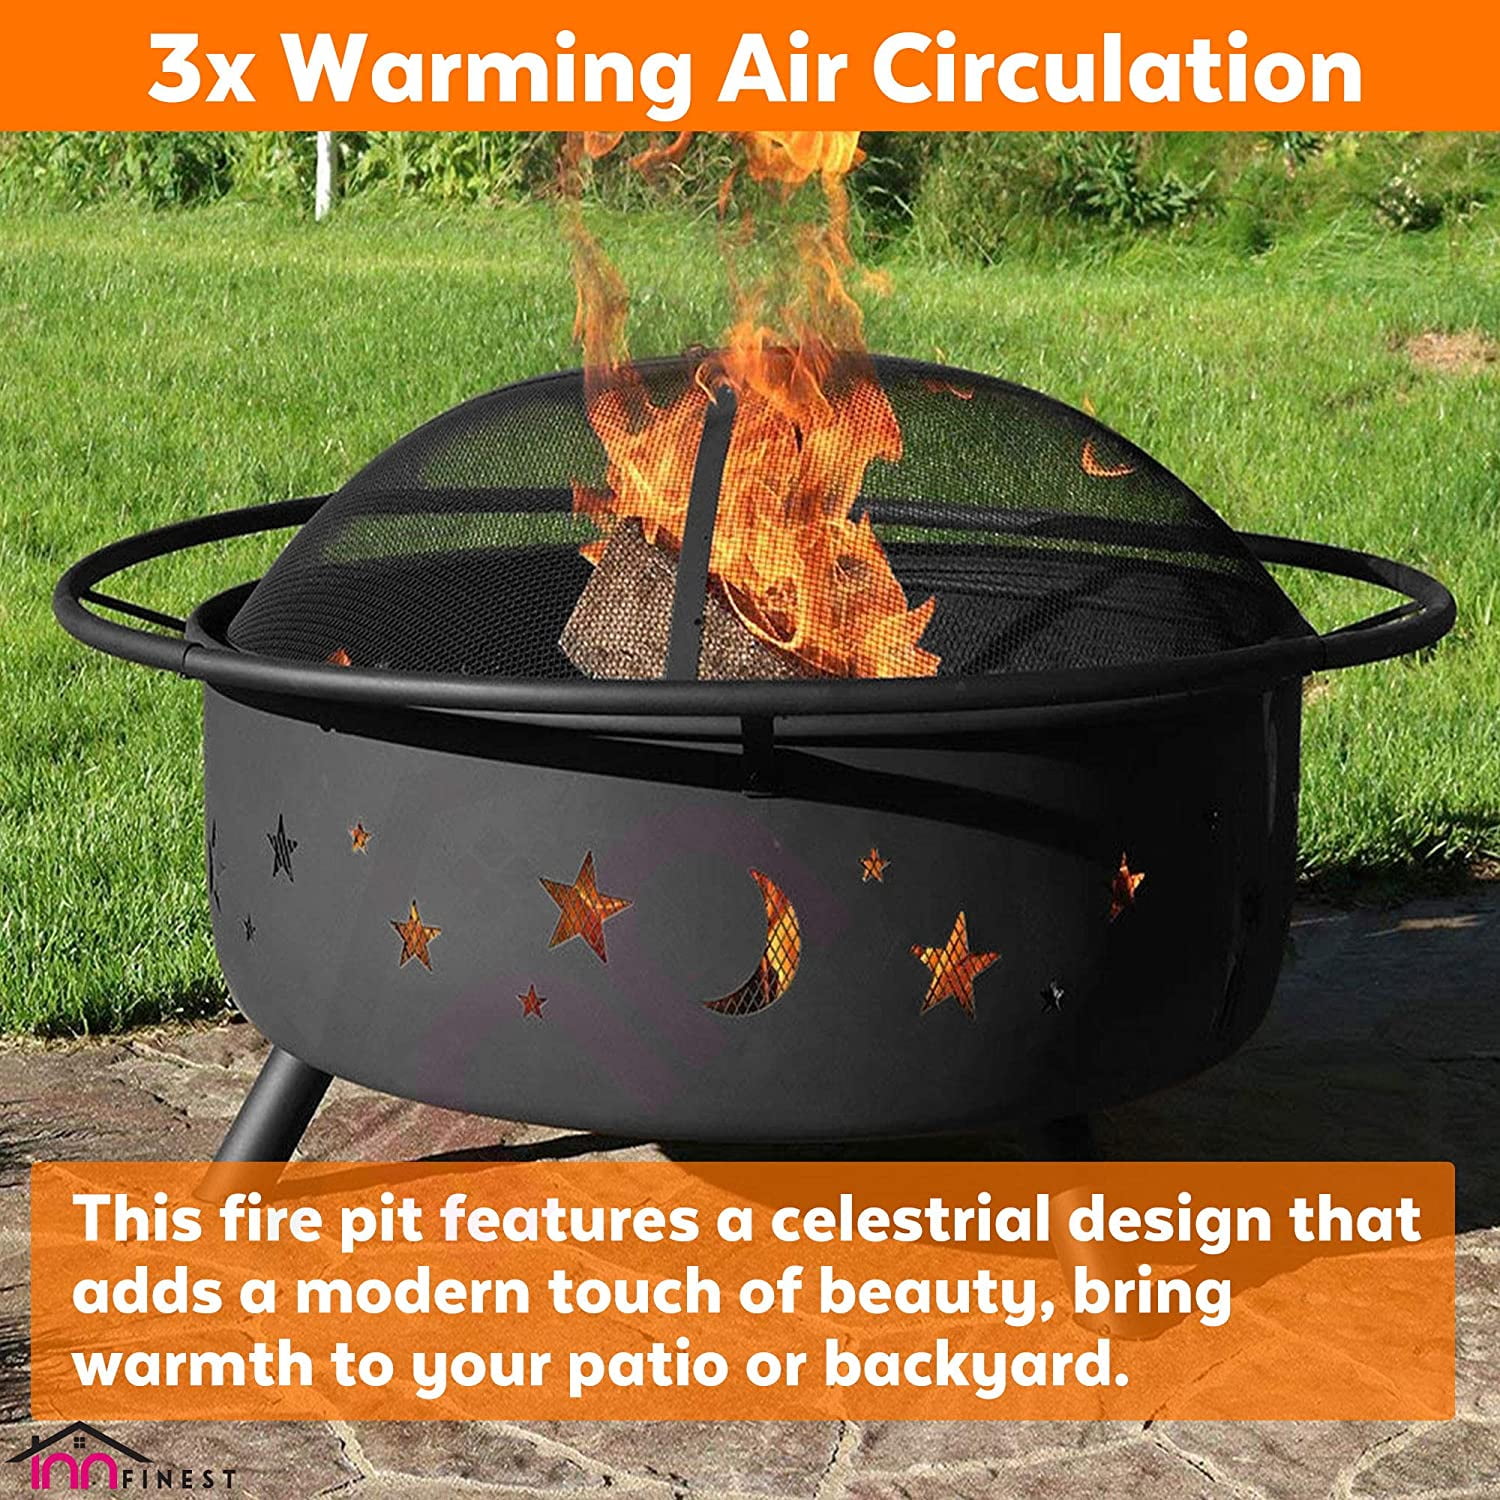 Spark Screen 6-in-1 Large Bonfire Wood Burning Firepit Bowl Drainage Holes Metal Grate Fireplace Poker Waterproof Cover For Outdoor Backyard Terrace Patio 31 Outdoor Fire Pit Set Ash Plate 